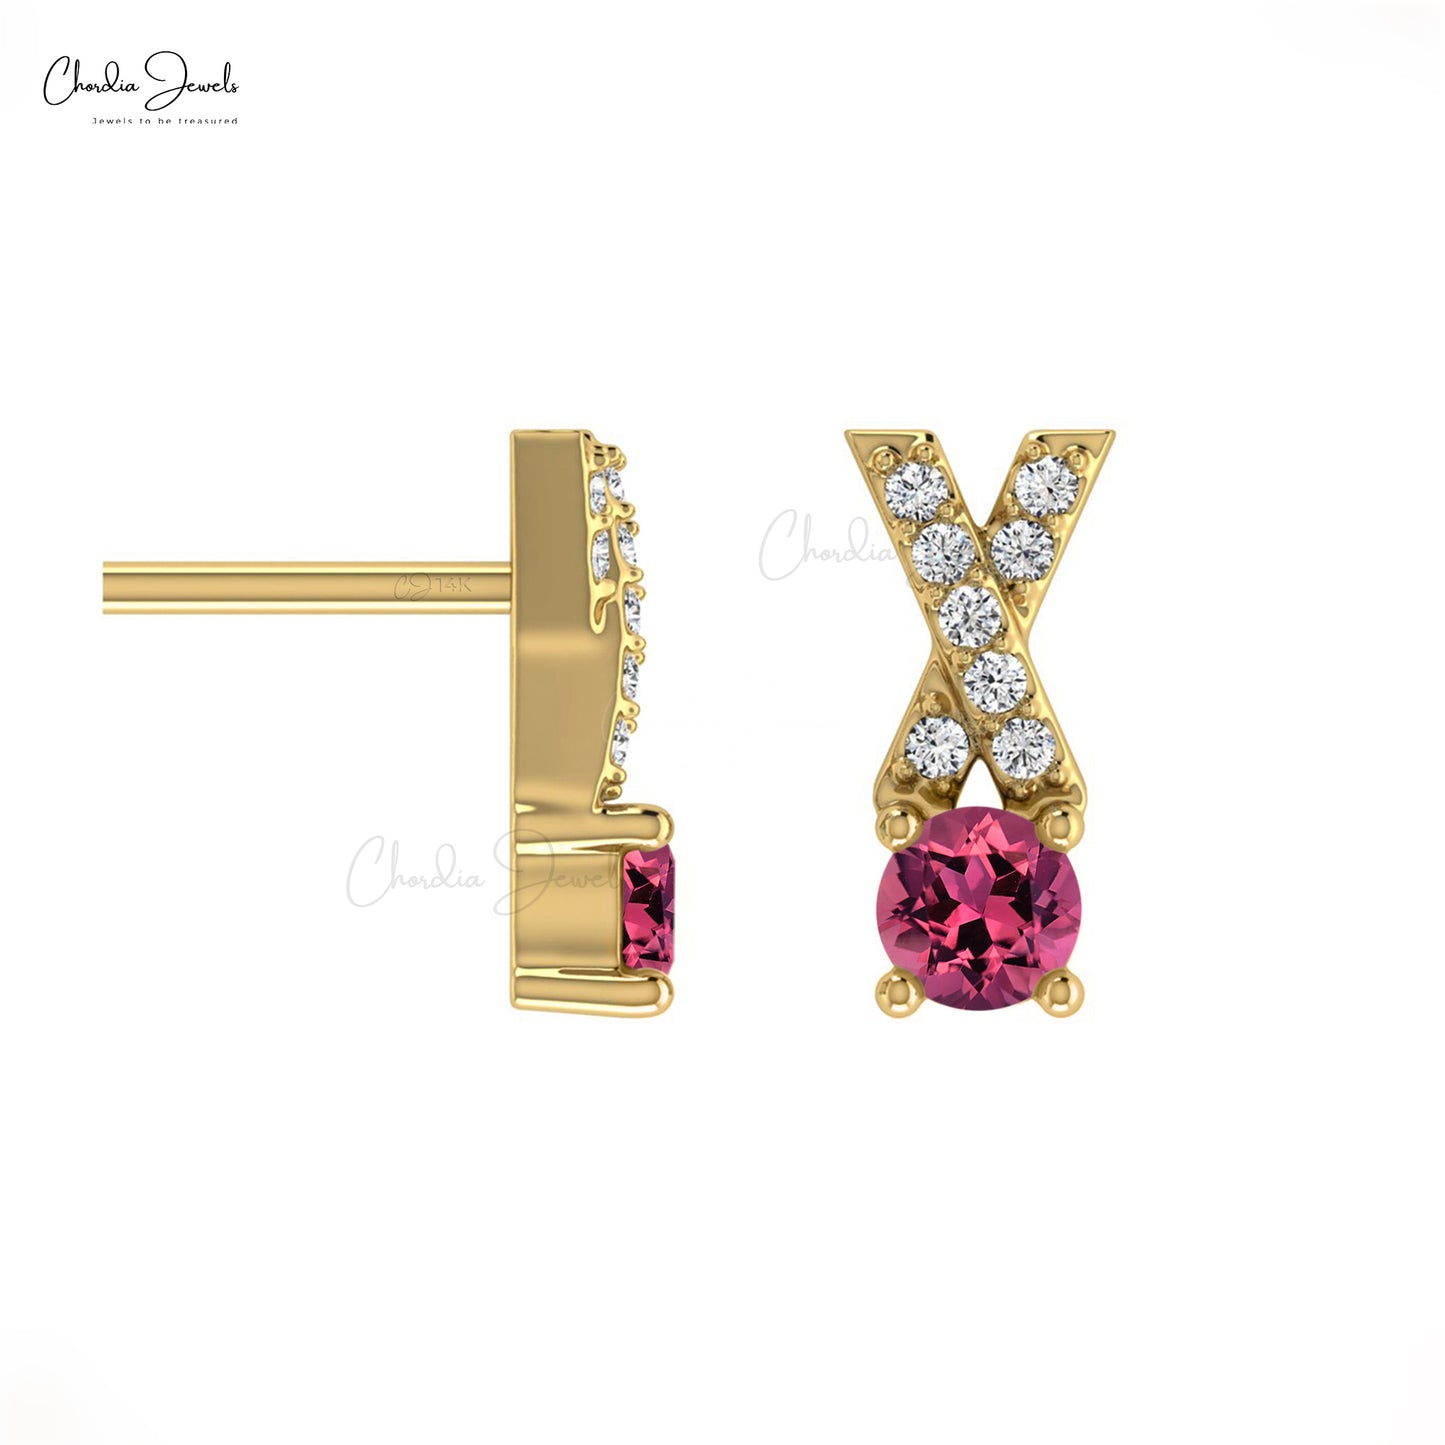 AAA Qaulity Pink Tourmaline Studs Earring In 14k Solid Gold With White Diamond Criss Cross Earring 5mm Round Cut Handmade Gemstone Earring For Women's